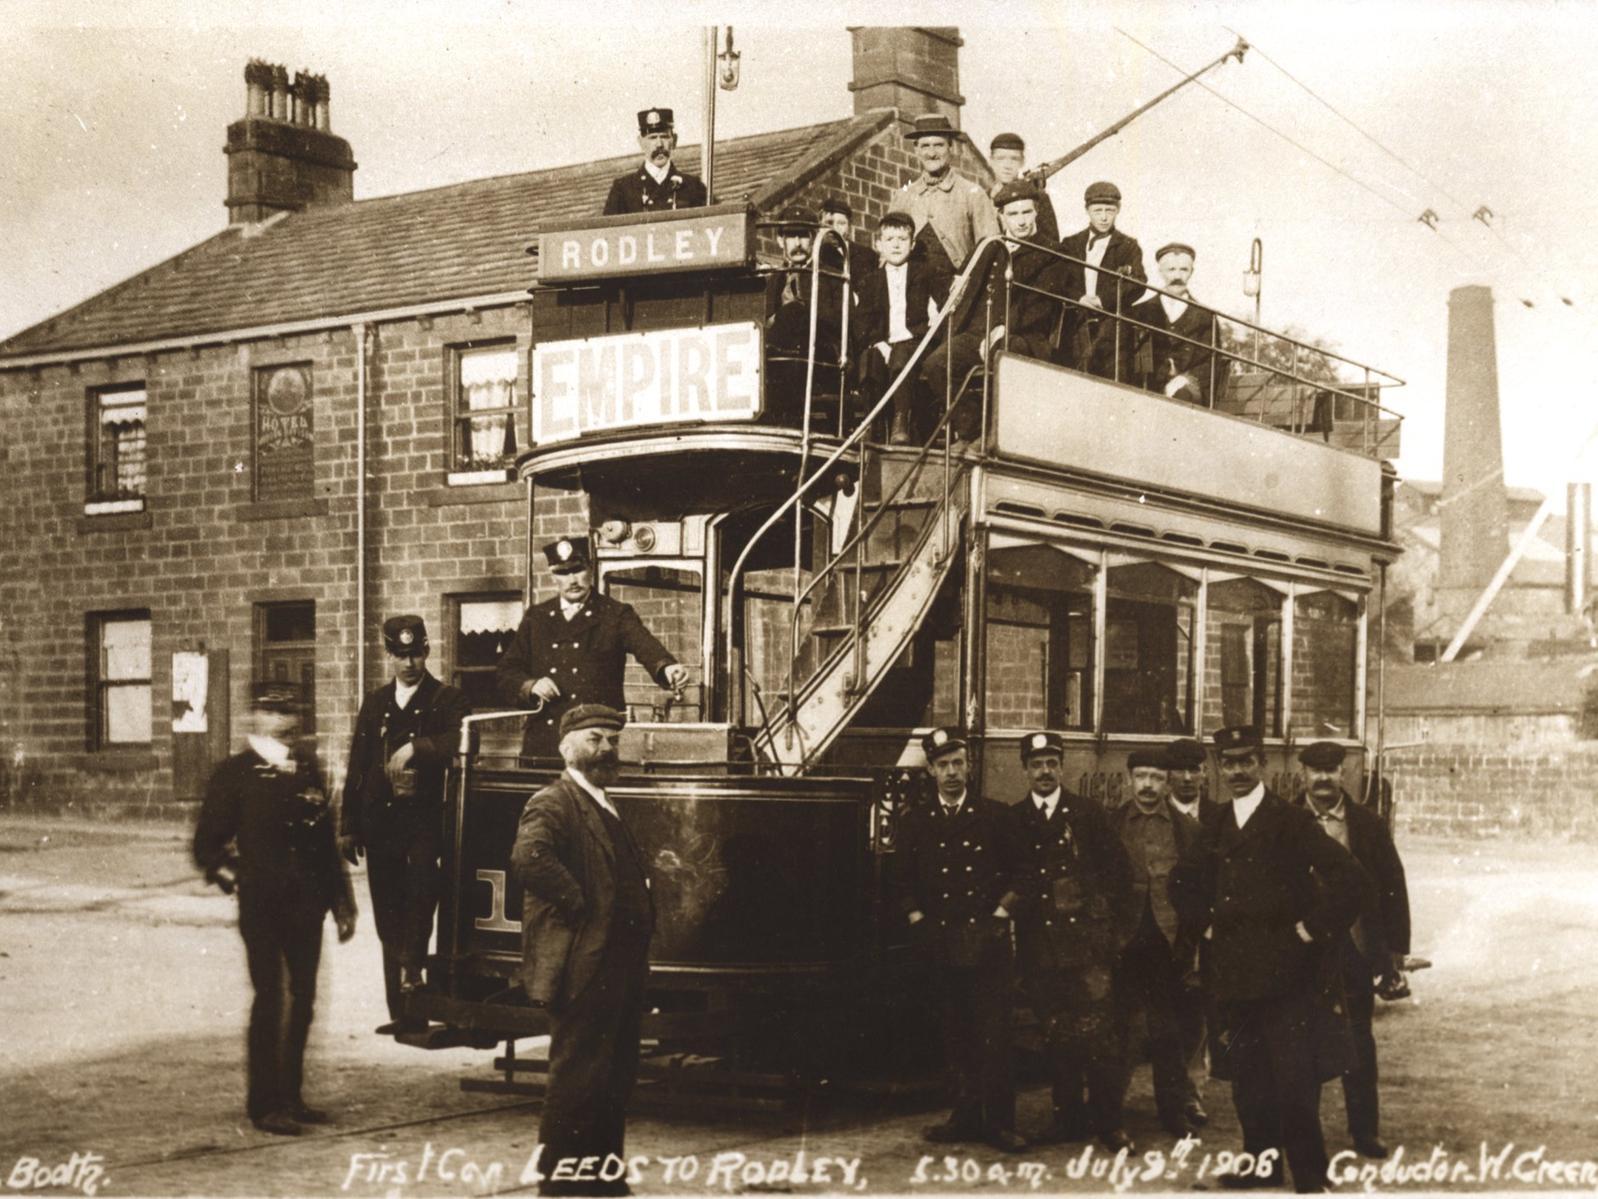 The first tram to Rodley from Pudsey at 5.30am July 9, 1906.